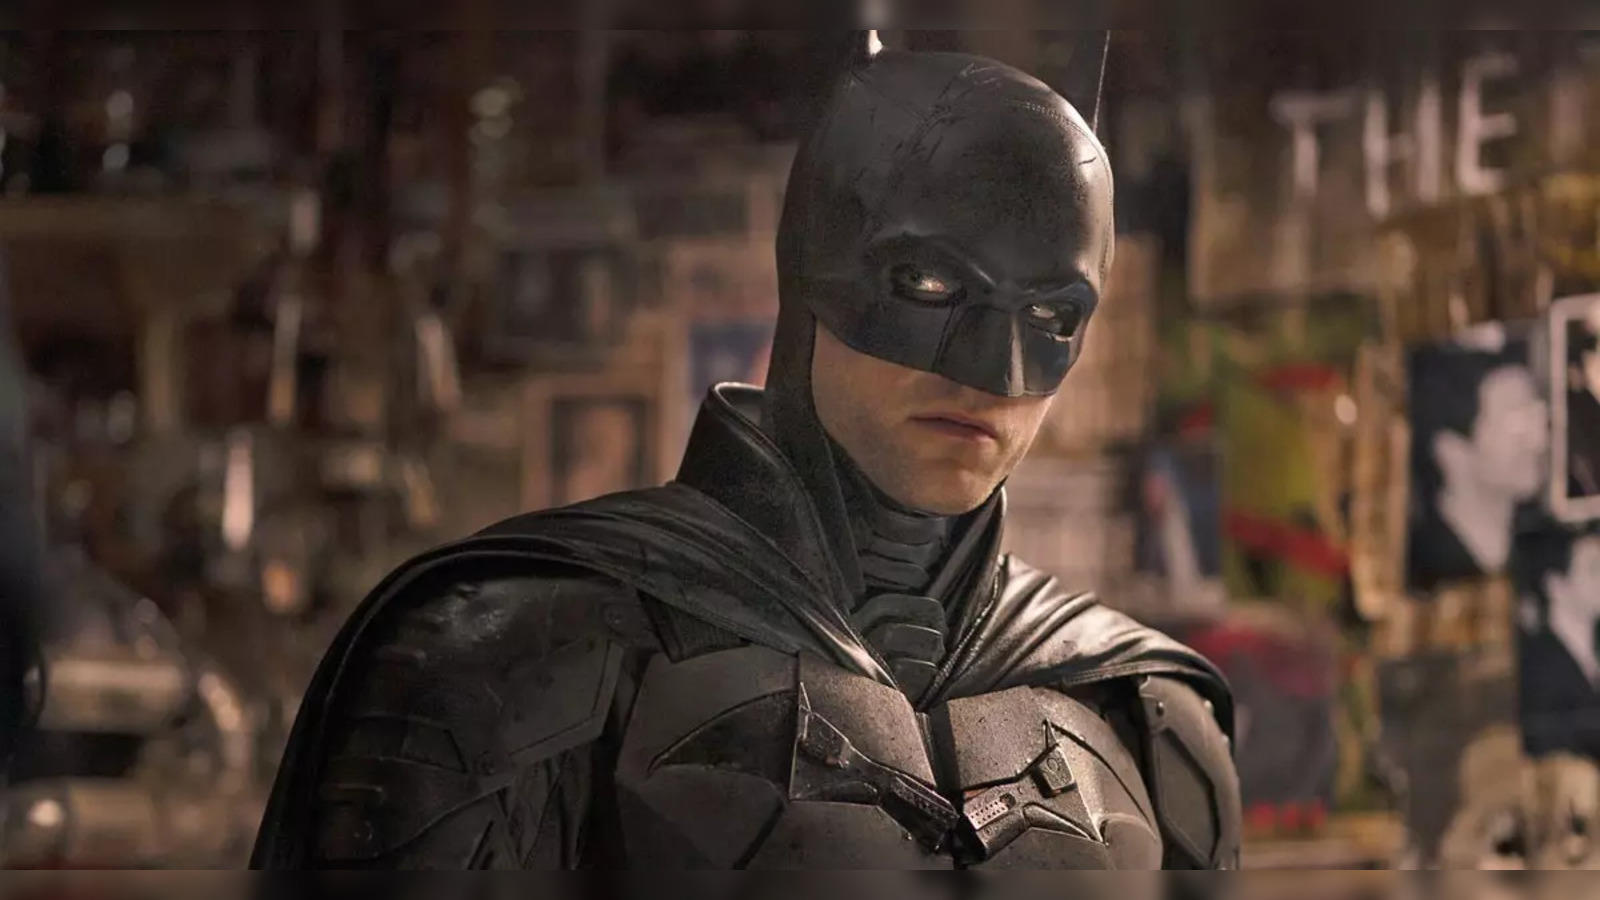 The Batman 2 release date, cast, key details. All you need to know - The  Economic Times